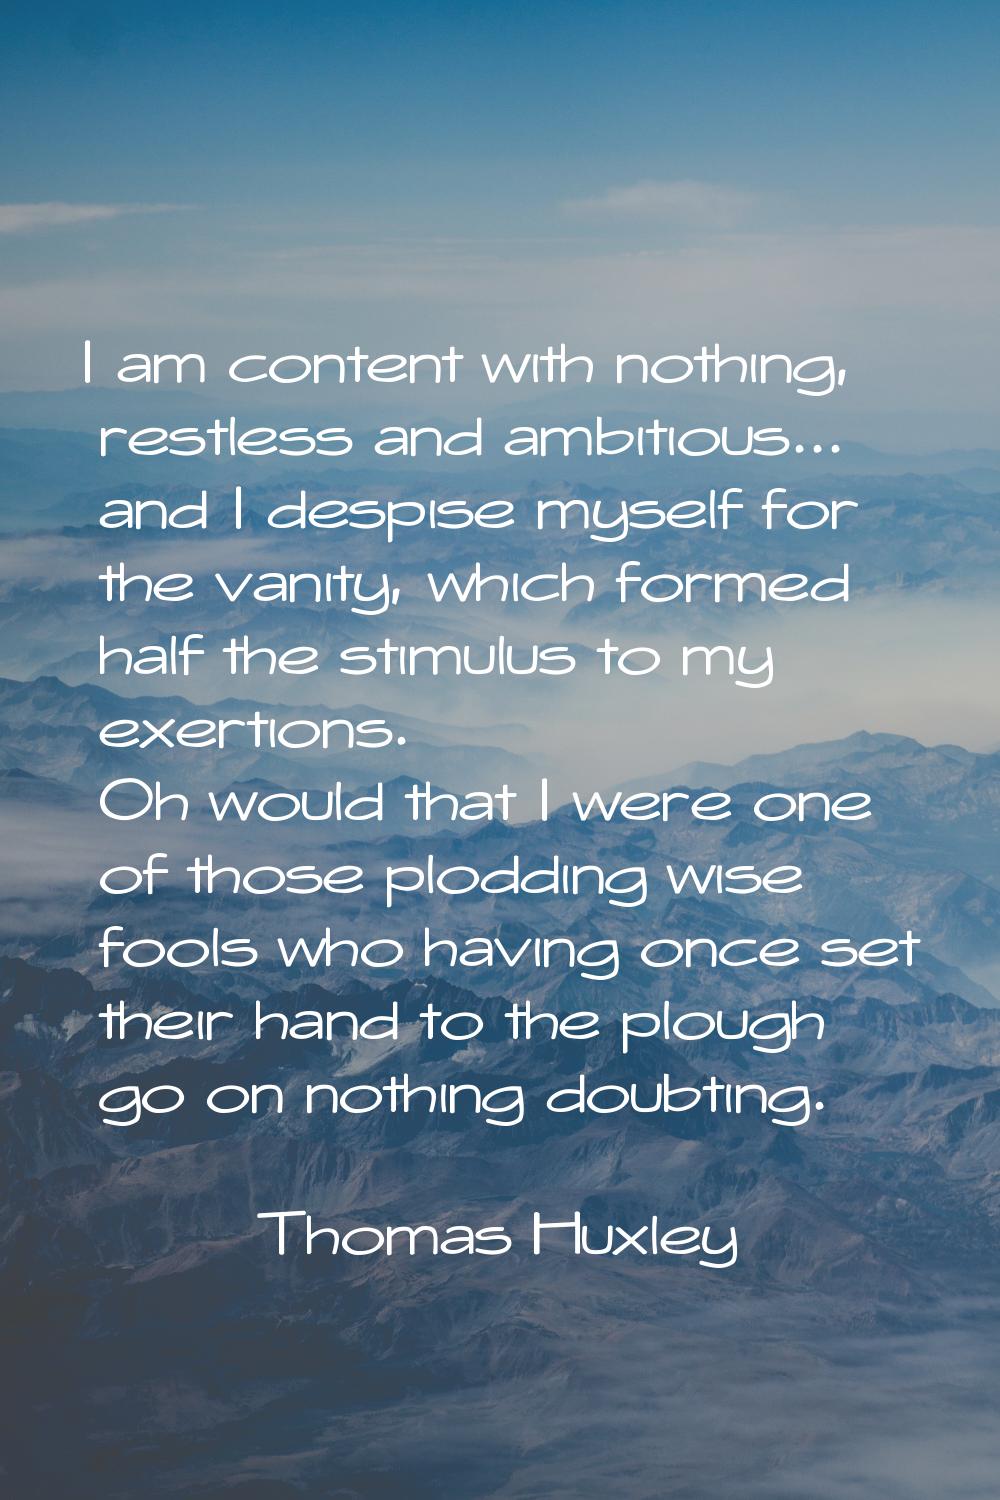 I am content with nothing, restless and ambitious... and I despise myself for the vanity, which for